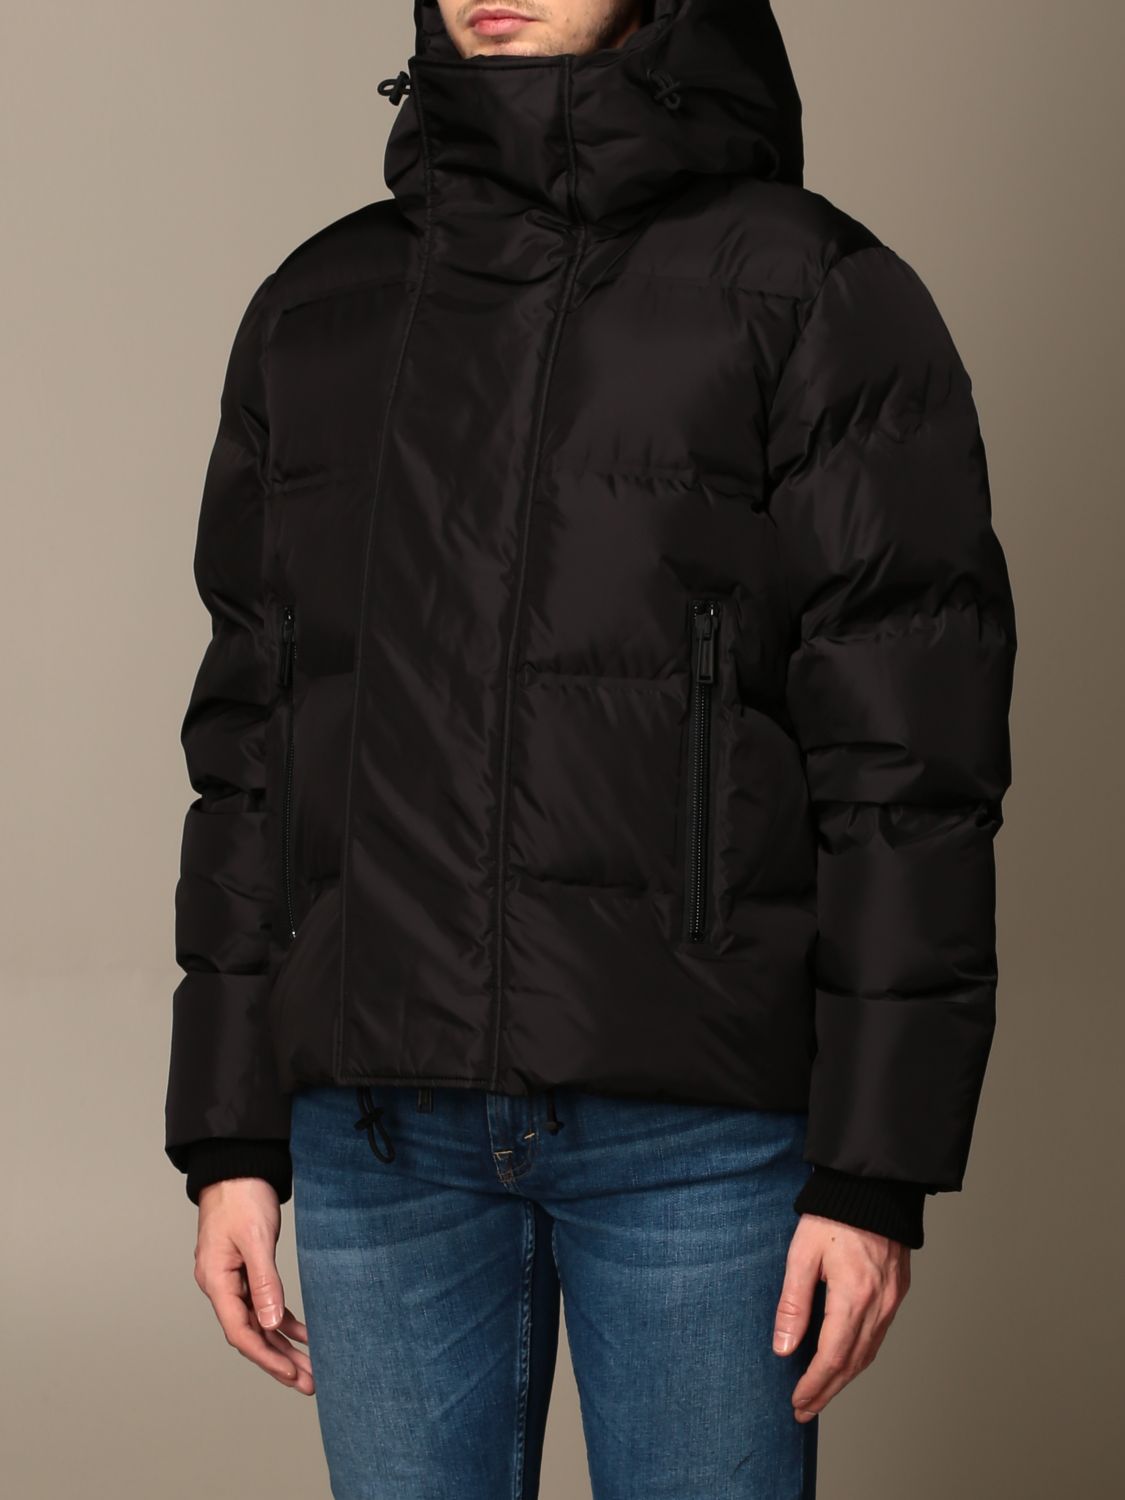 DSQUARED2: padded down jacket with hood and logo - Black | Dsquared2 ...